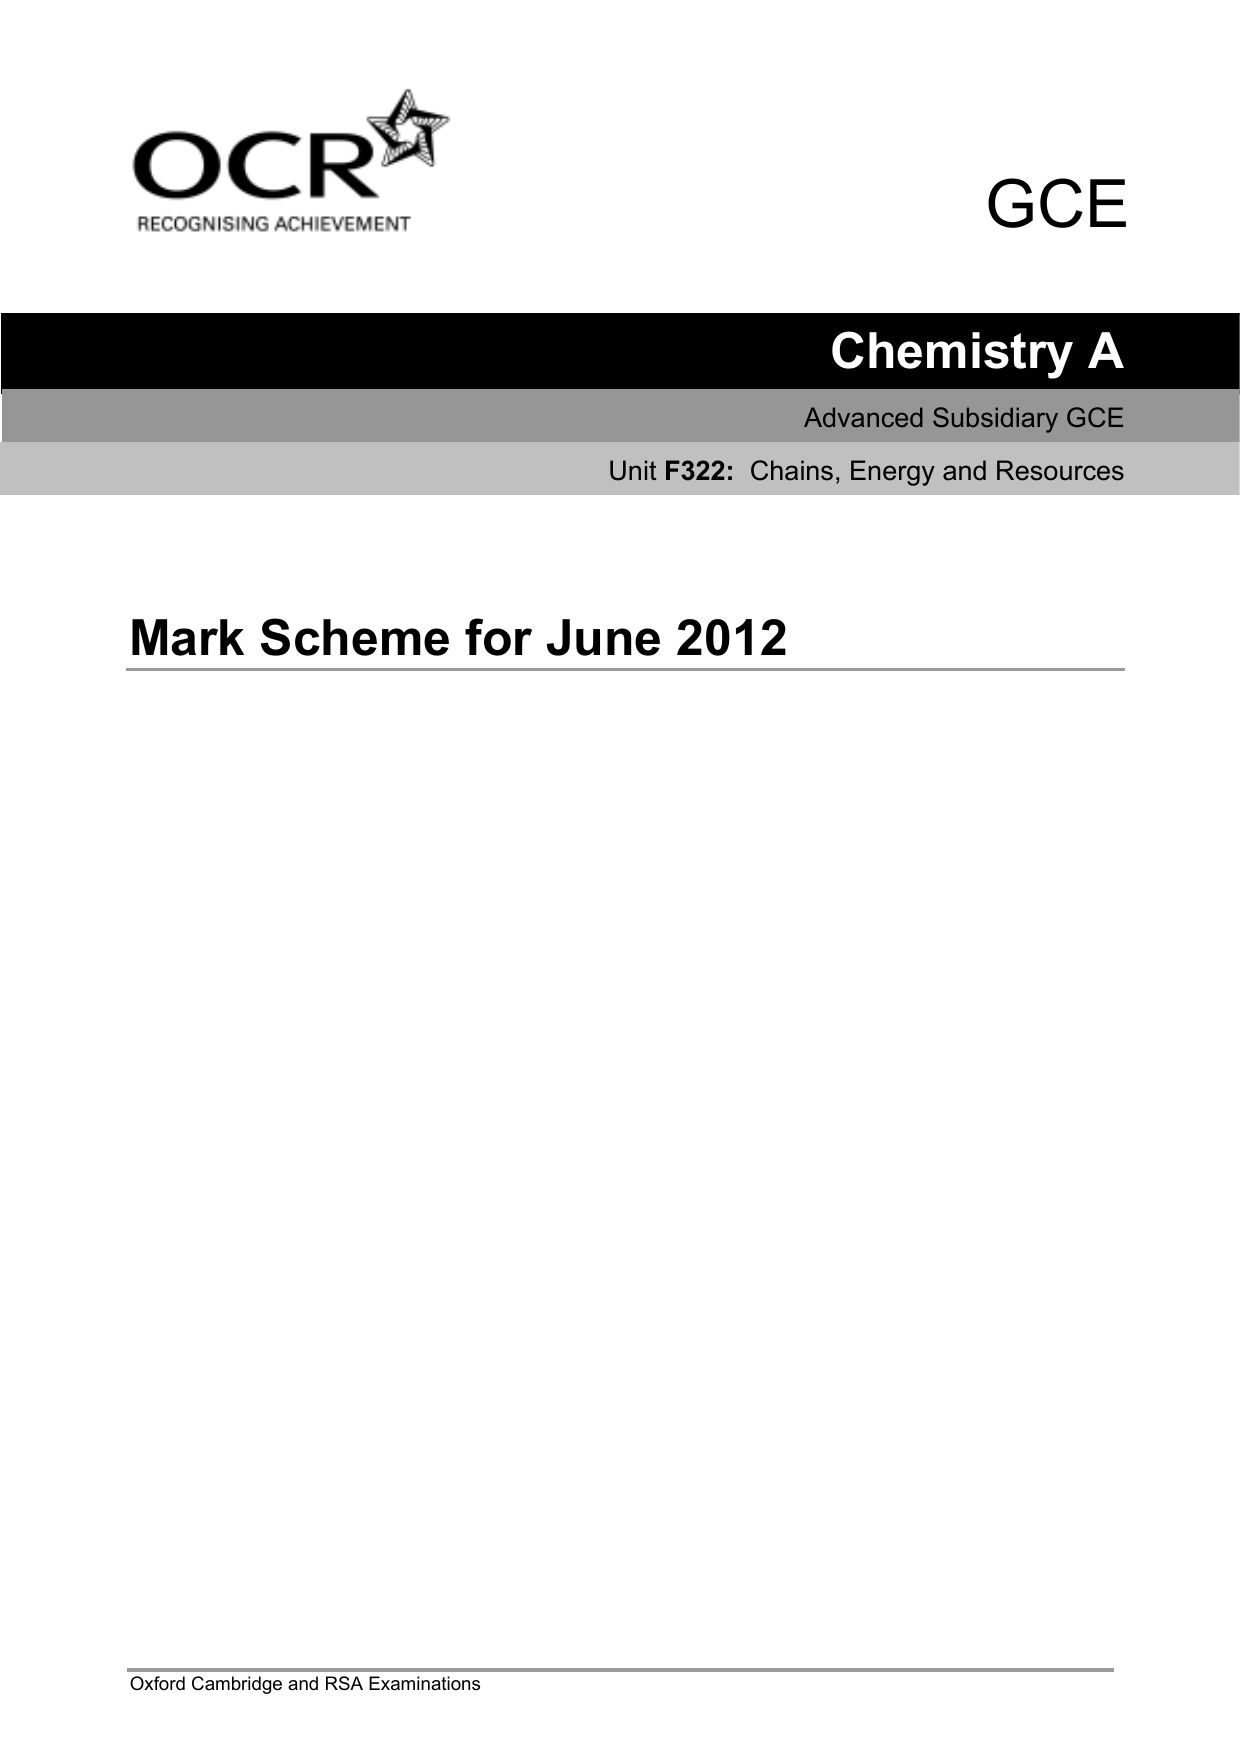 Mark Scheme Unit F322 Chains, energy and resources